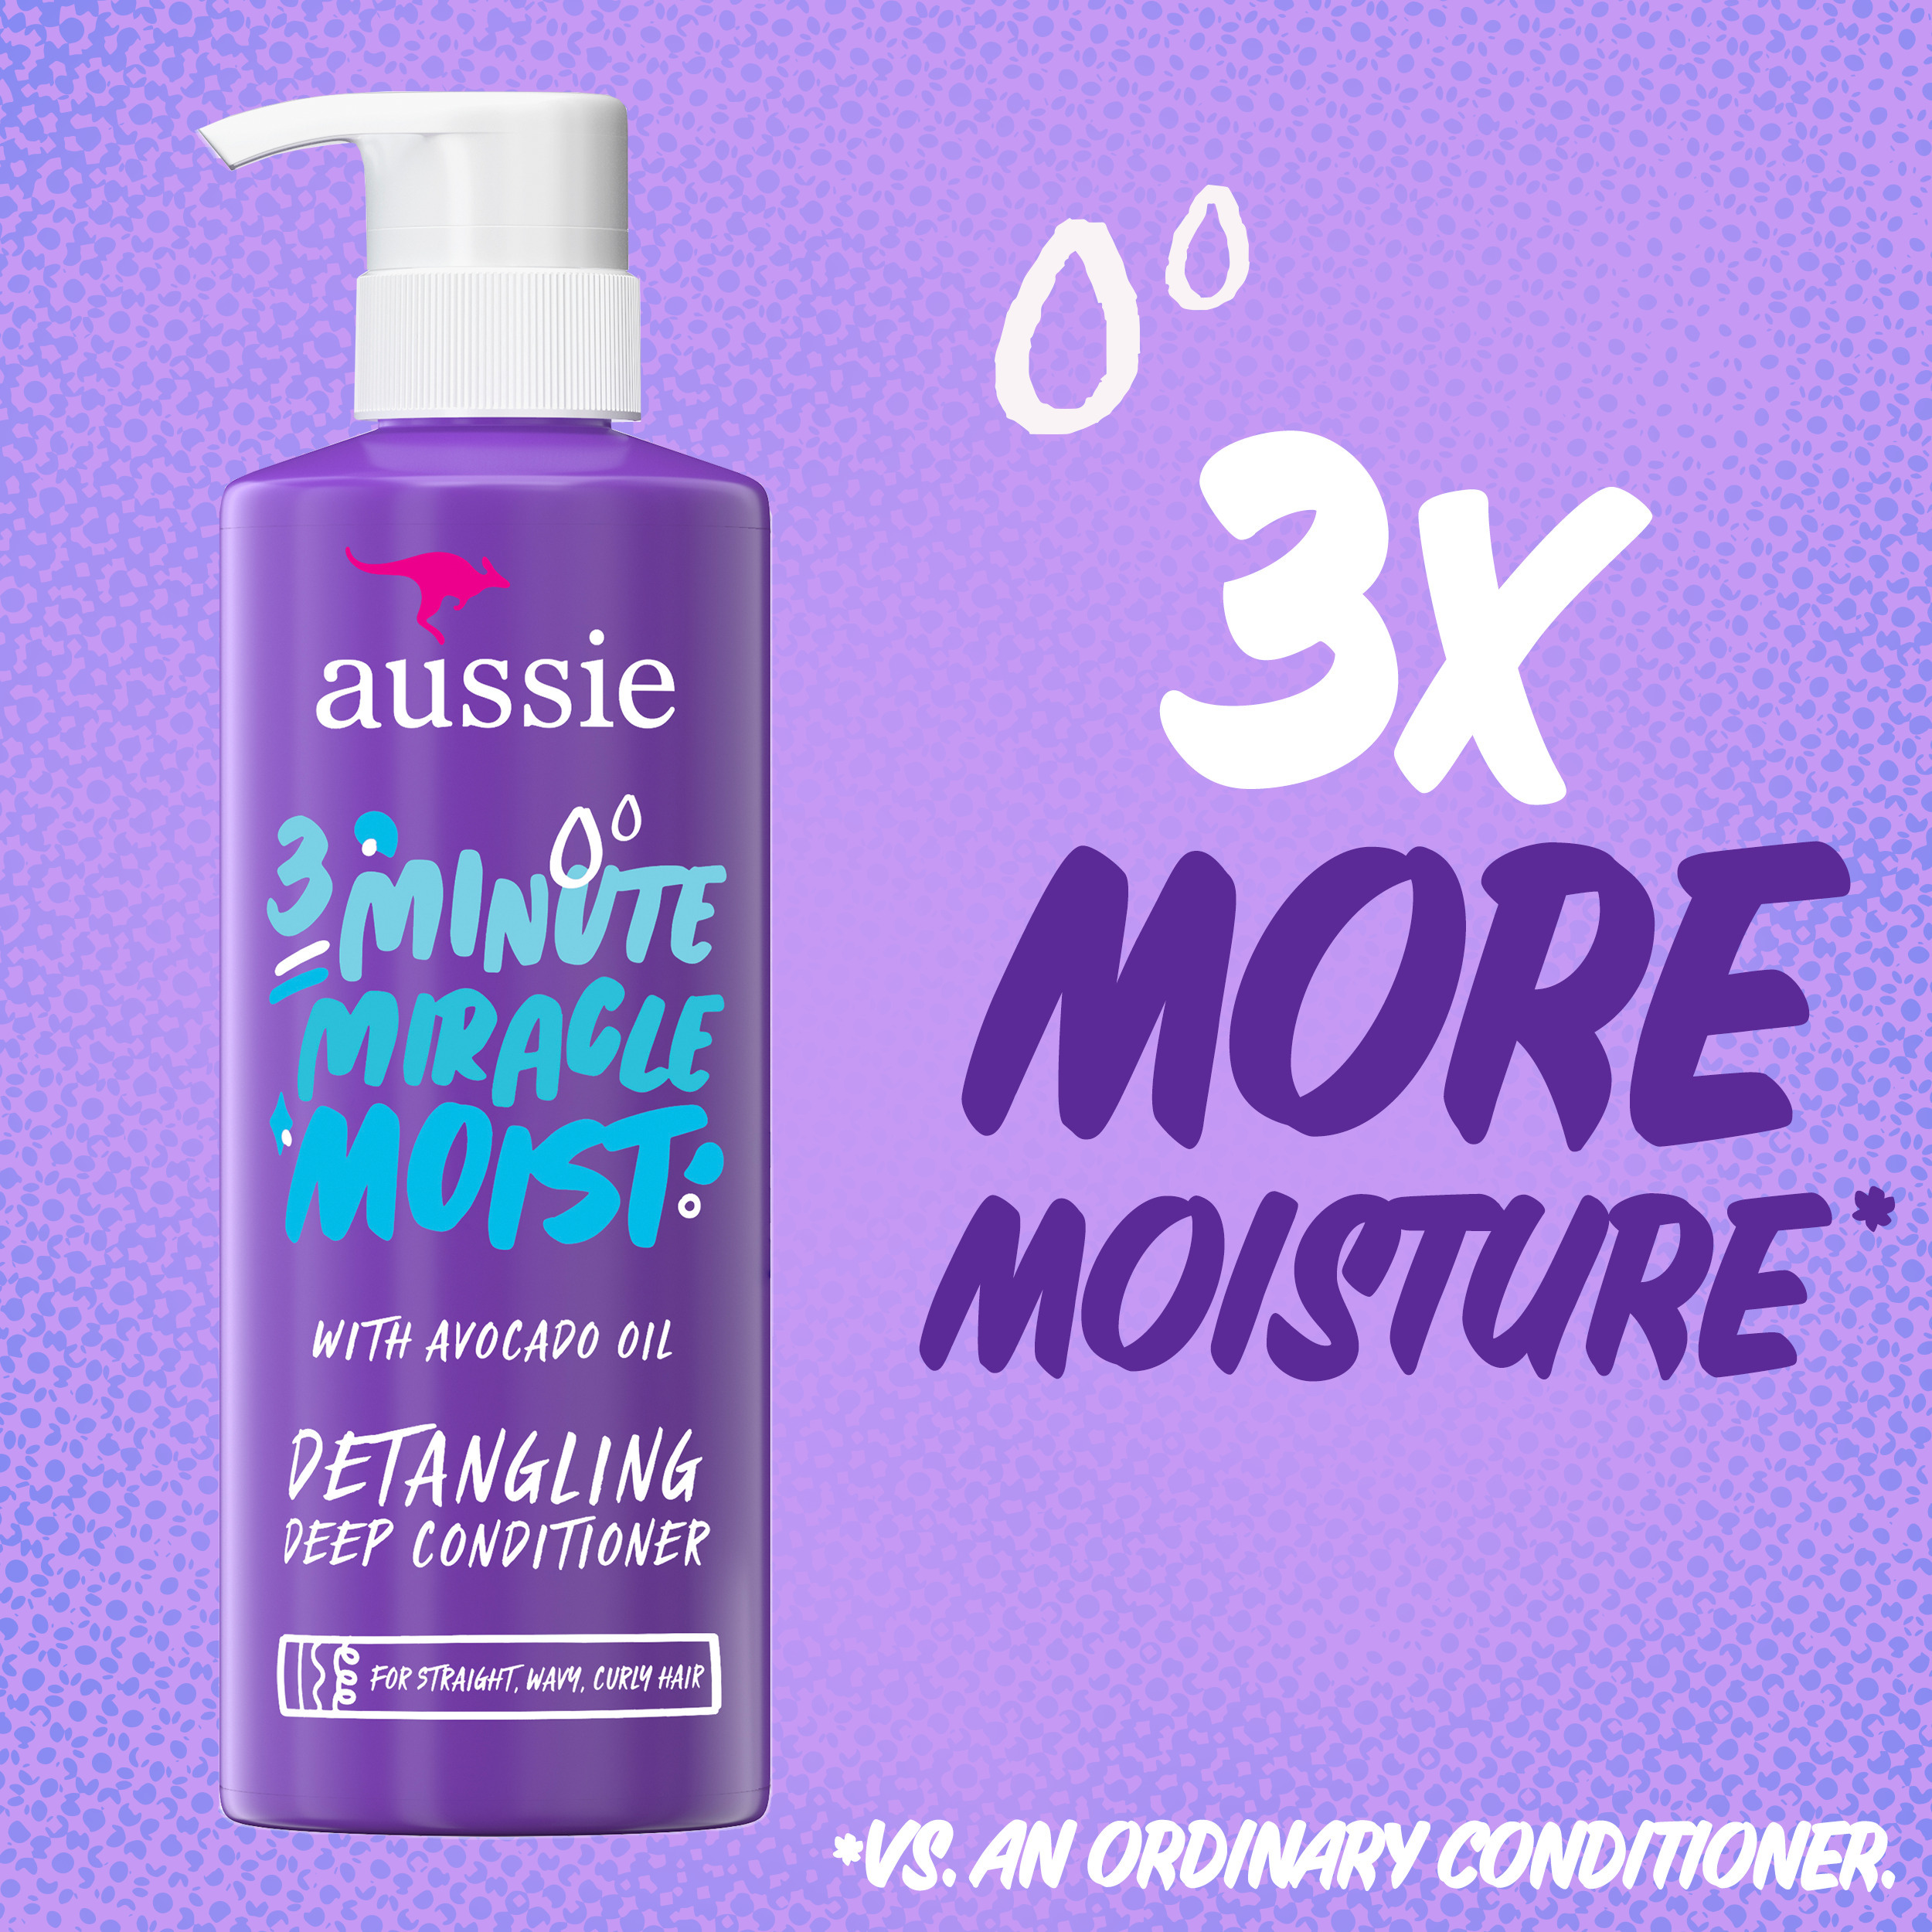 Aussie 3 Minute Miracle Moist Deep Conditioner, Paraben Free, 16 oz - image 5 of 12